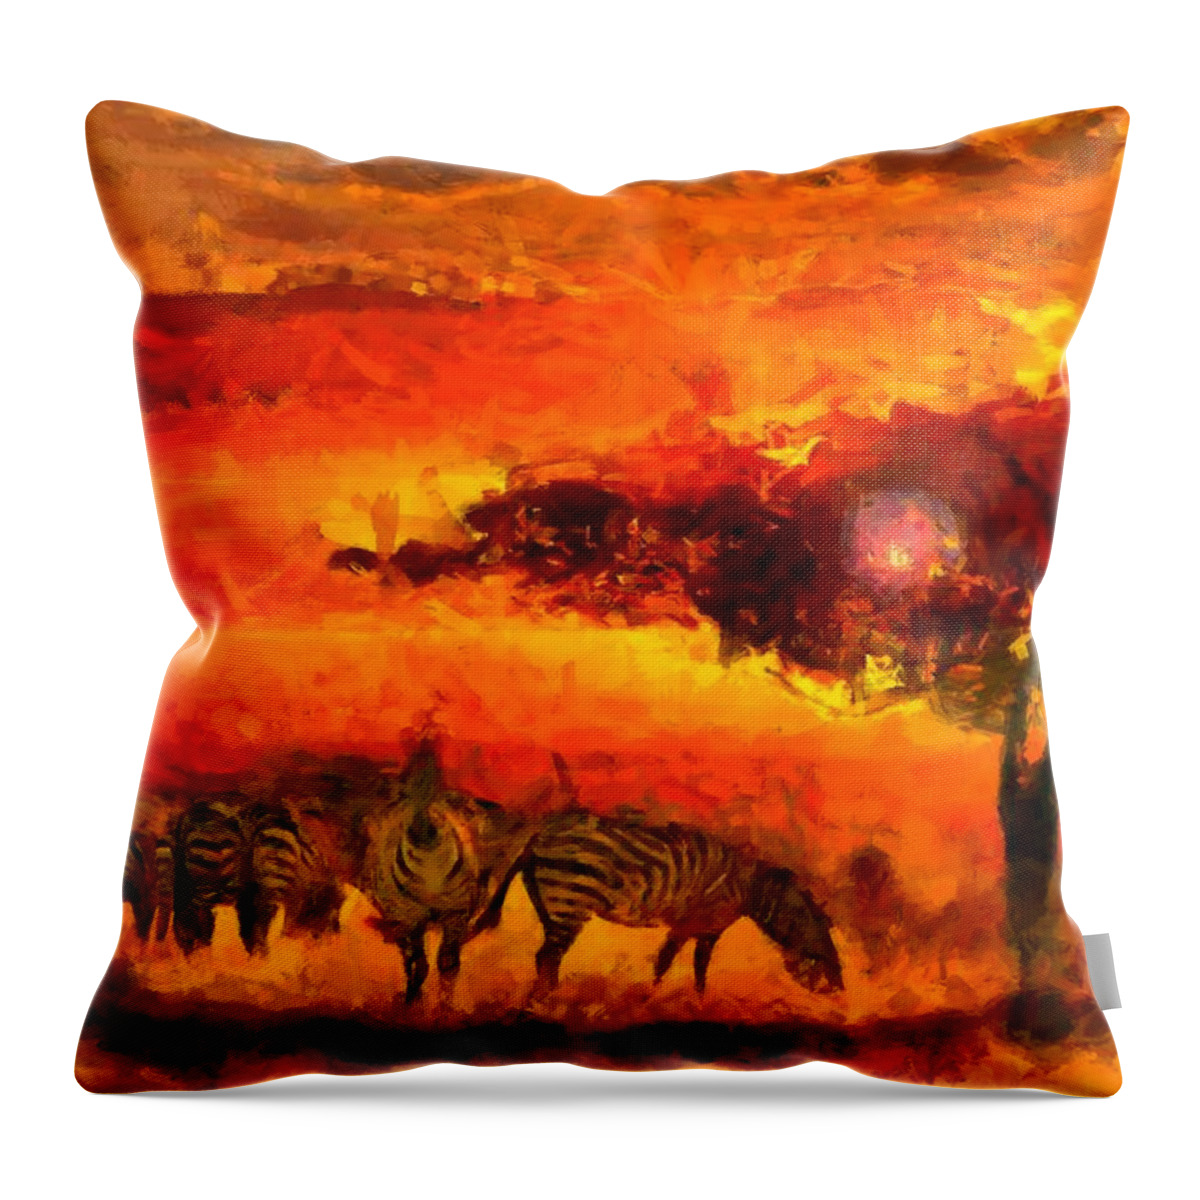 African Landscape Throw Pillow featuring the digital art African Landscape by Caito Junqueira